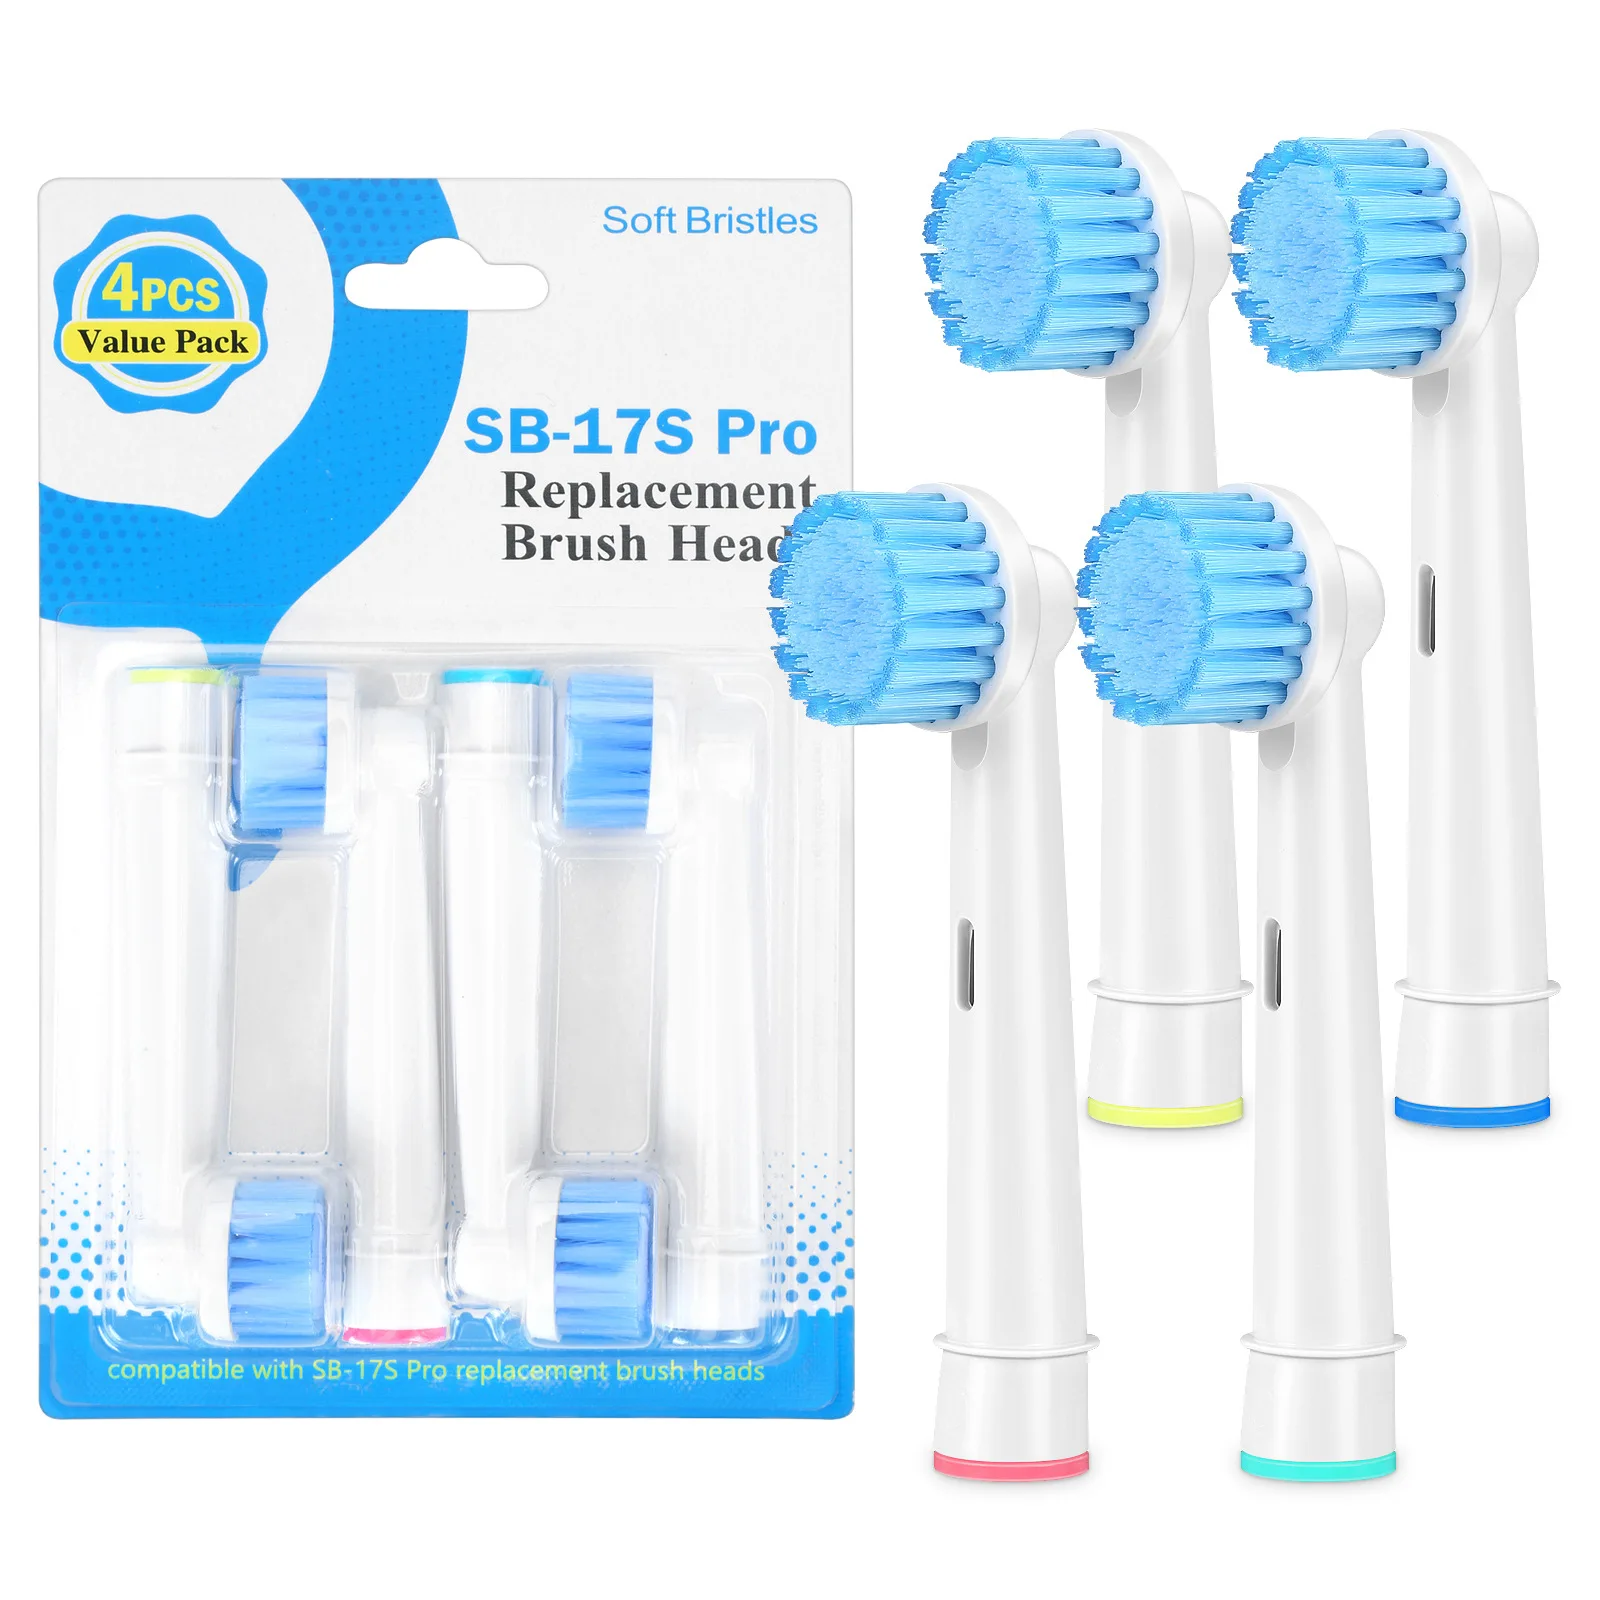 4 Pcs/Pack Replacement Brush Heads For Oral B Electric Toothbrush Head Soft Dupont Bristle Teeth Cleaning & Whitening Brush Head 4 8 12 16 pcs replacement brush heads for seago for fairywill electric toothbrush head dupont bristle brush refill tooth clean